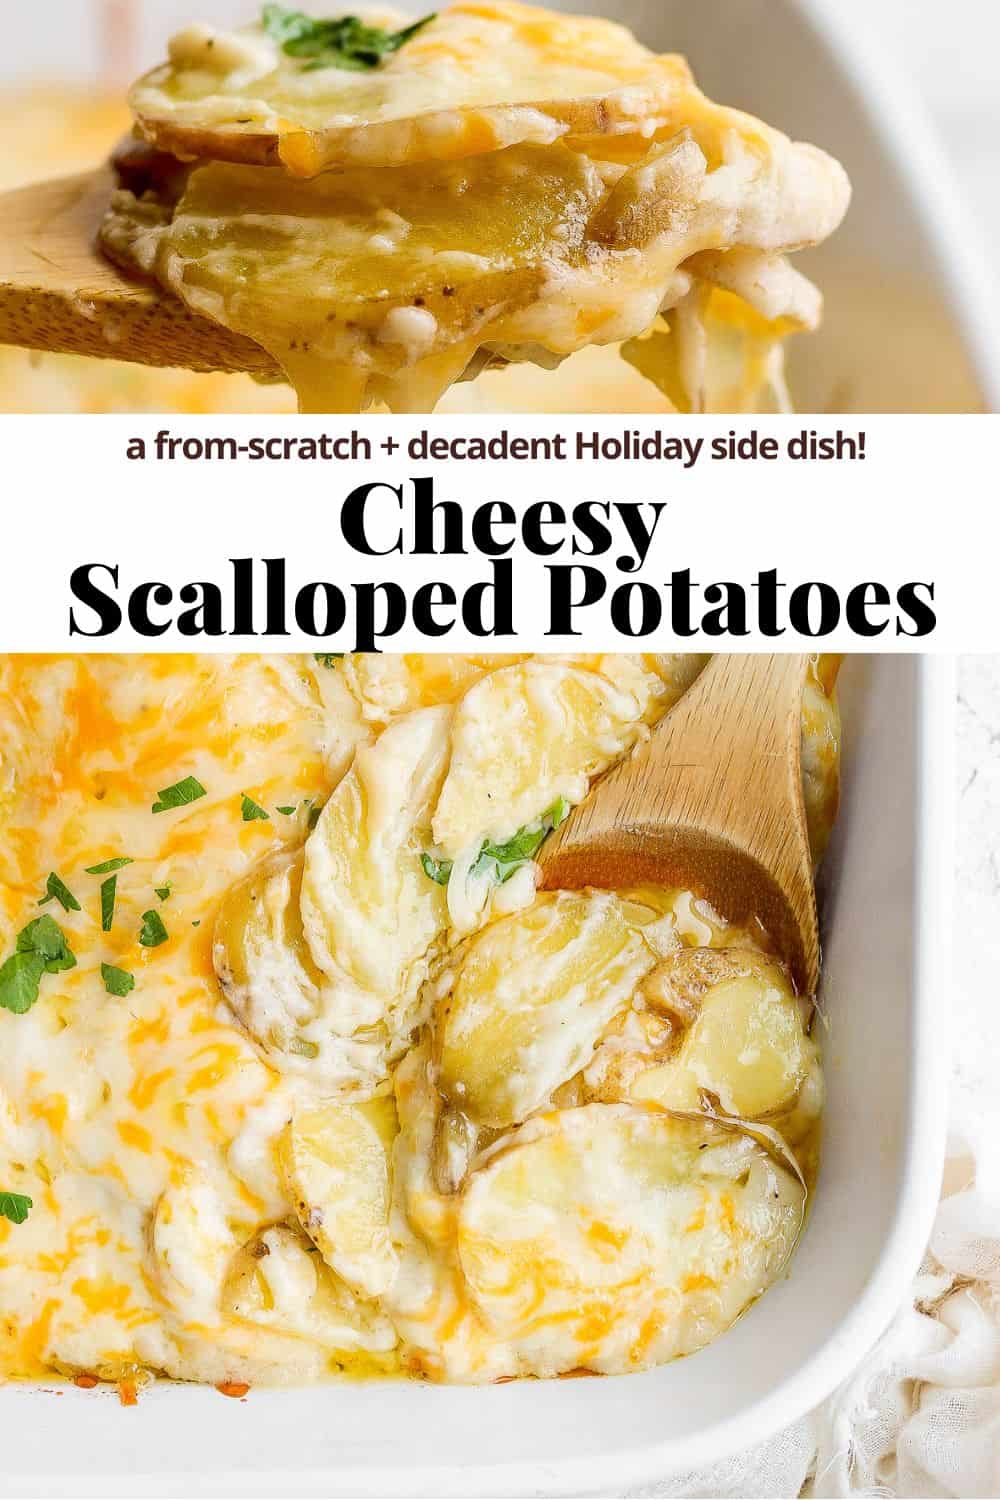 Pinterest image for cheesy scalloped potatoes.